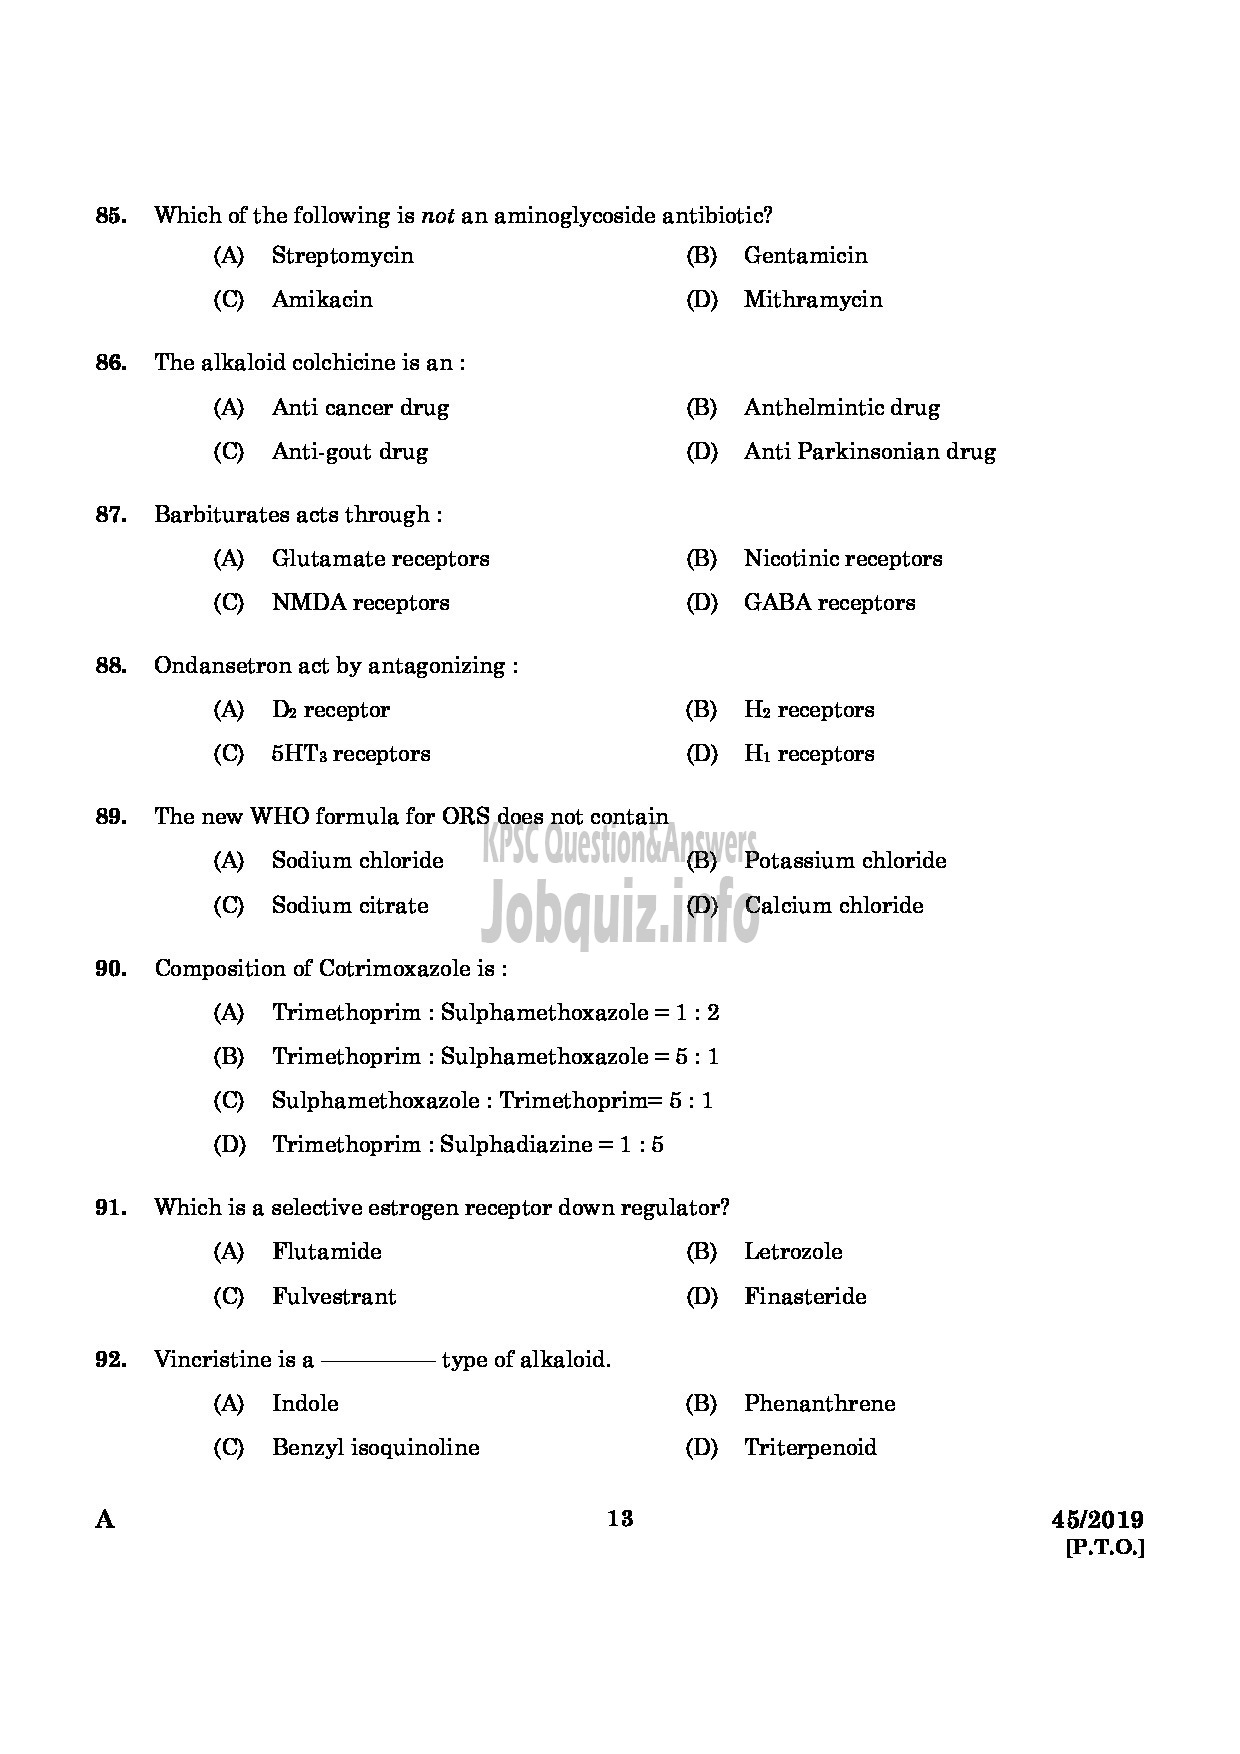 Kerala PSC Question Paper - Pharmacist Gr II Health Services/IMS English -11